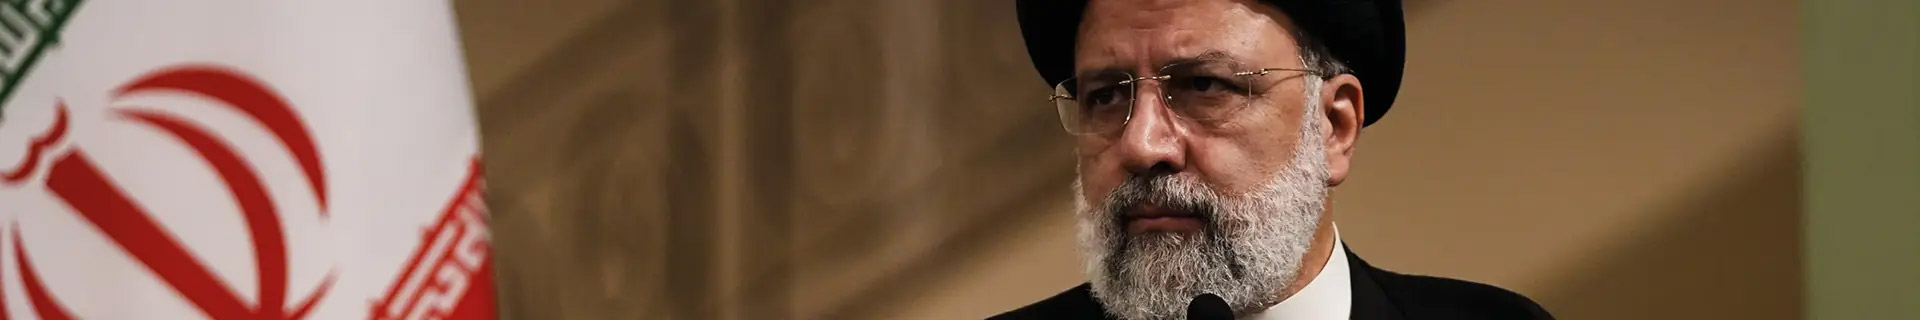 Iran policy continuity likely following death of Raisi 